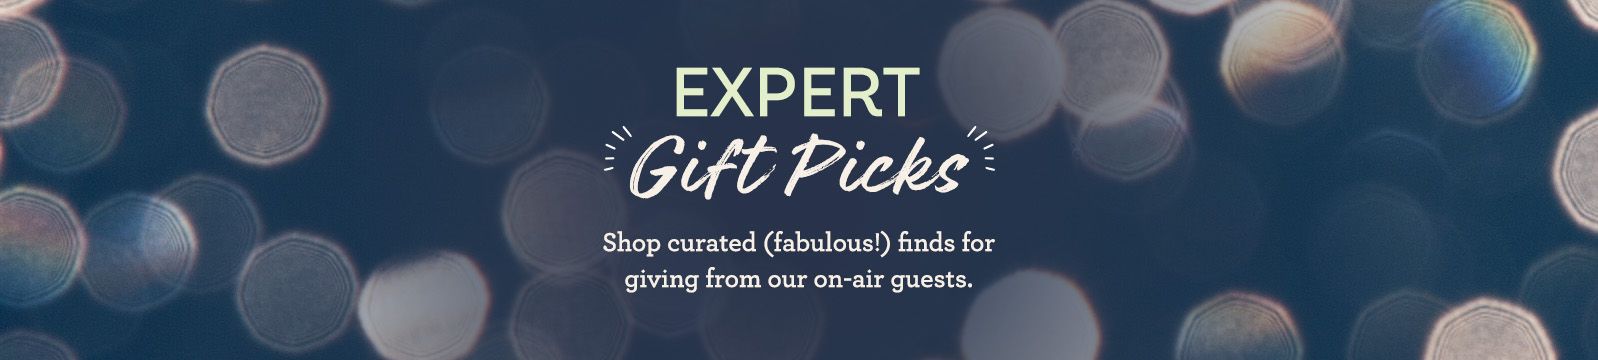 Expert Gift Picks. Shop curated (fabulous!) finds for giving from our on-air guests.